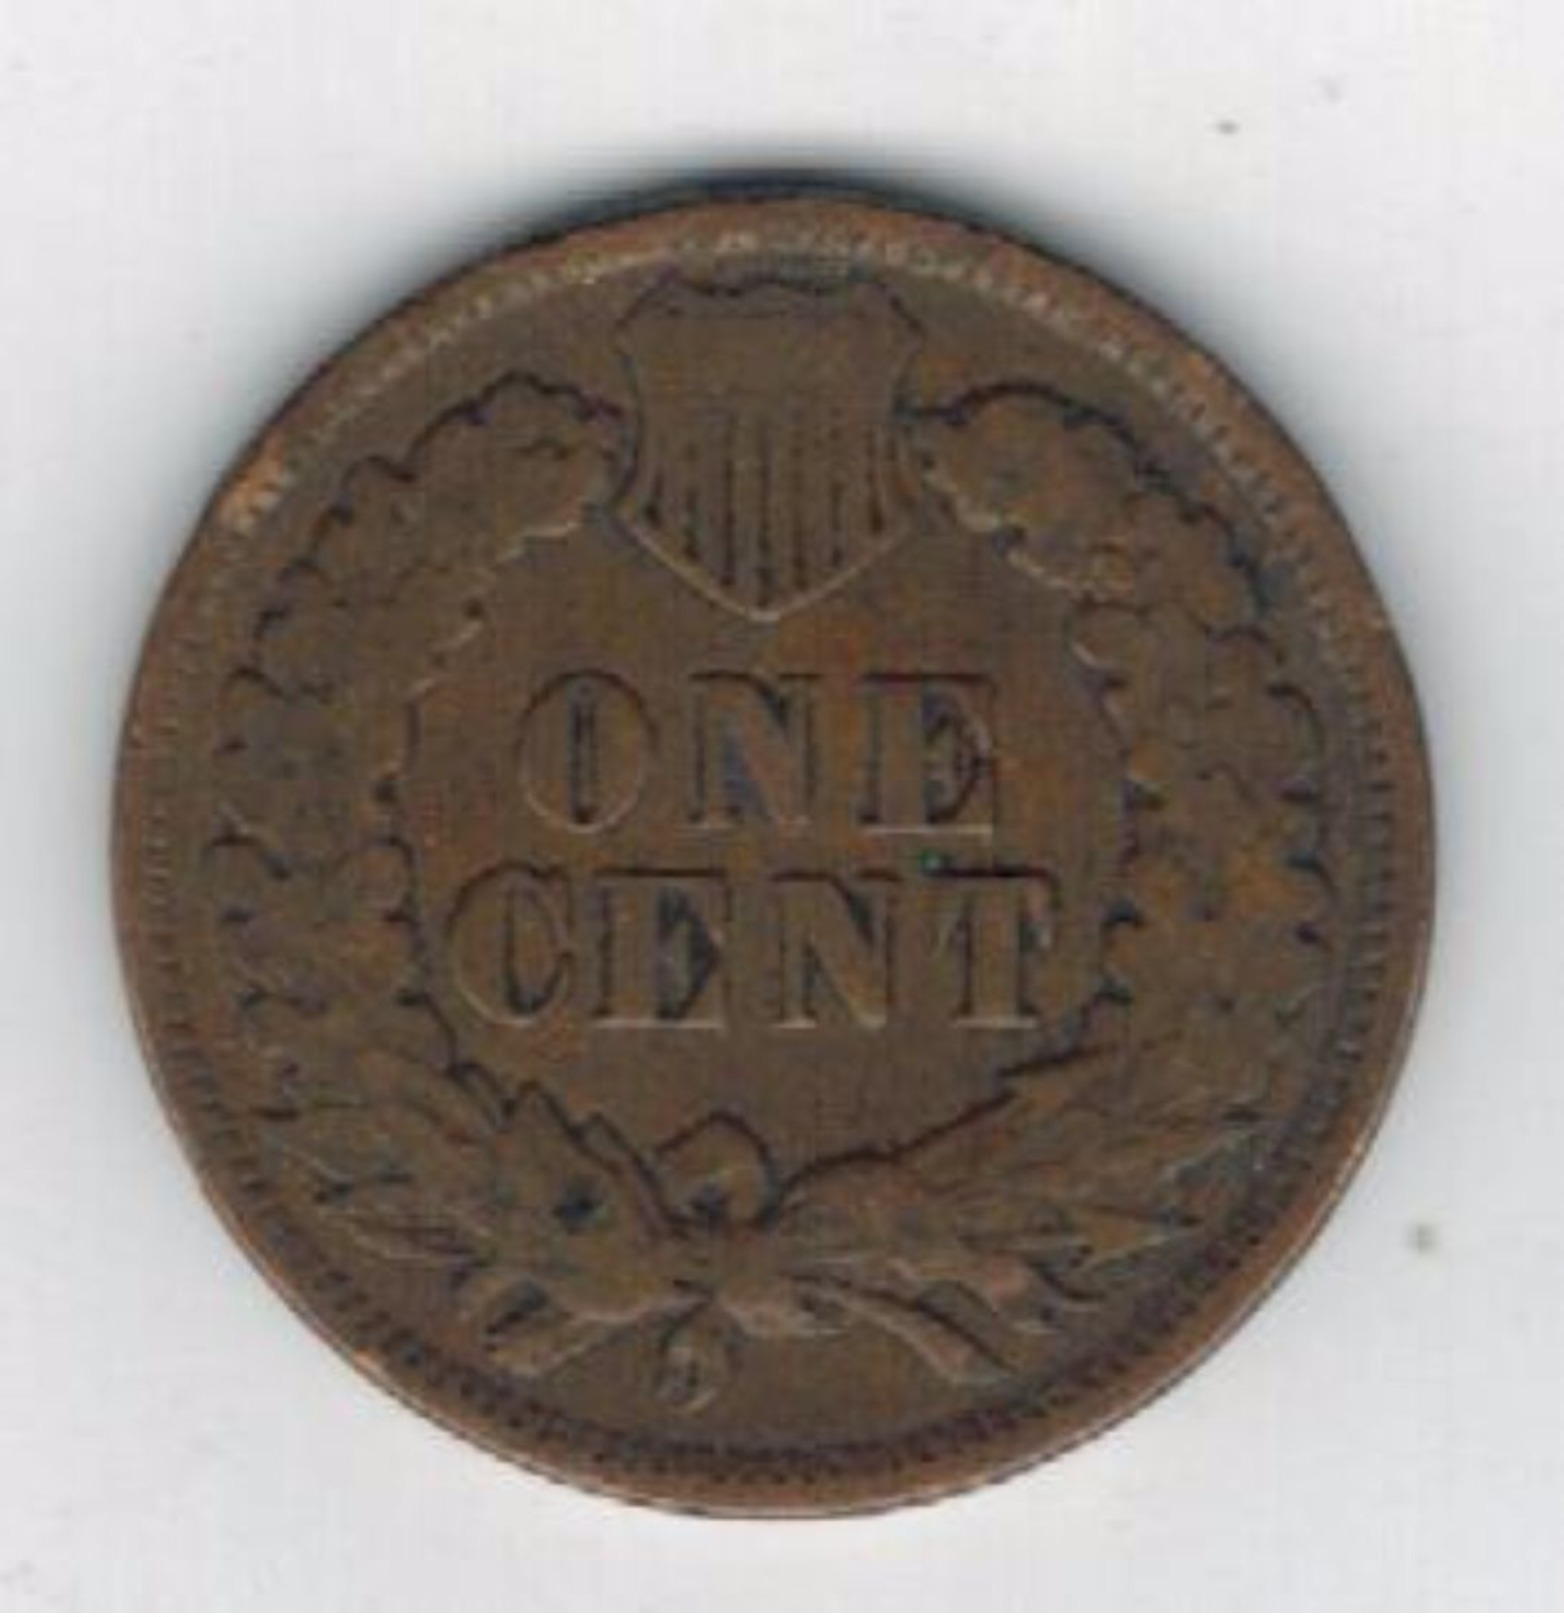 USA , One Cent,  Indian Head, 1902,  Used,  See Scans. - 1859-1909: Indian Head